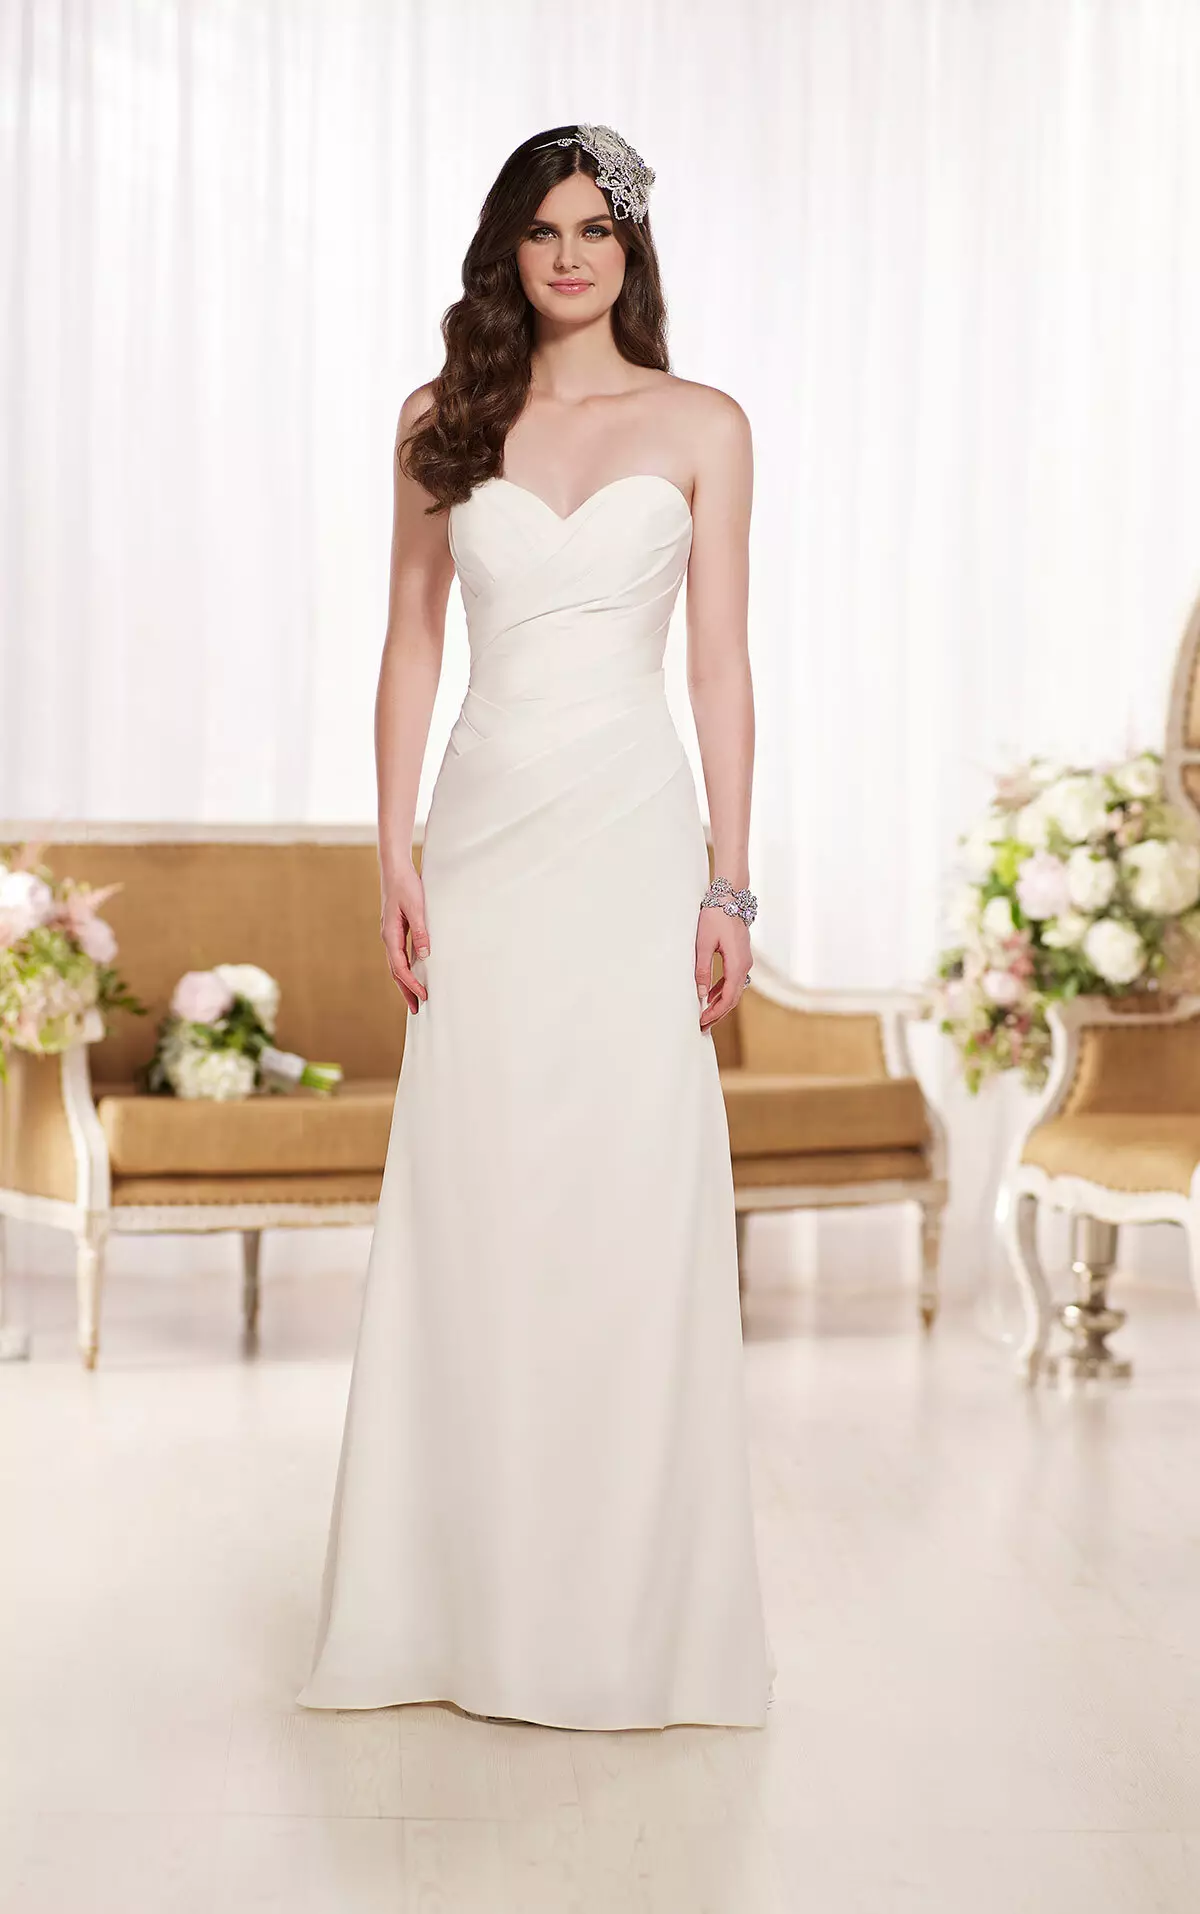 Sophistication of a direct wedding dress